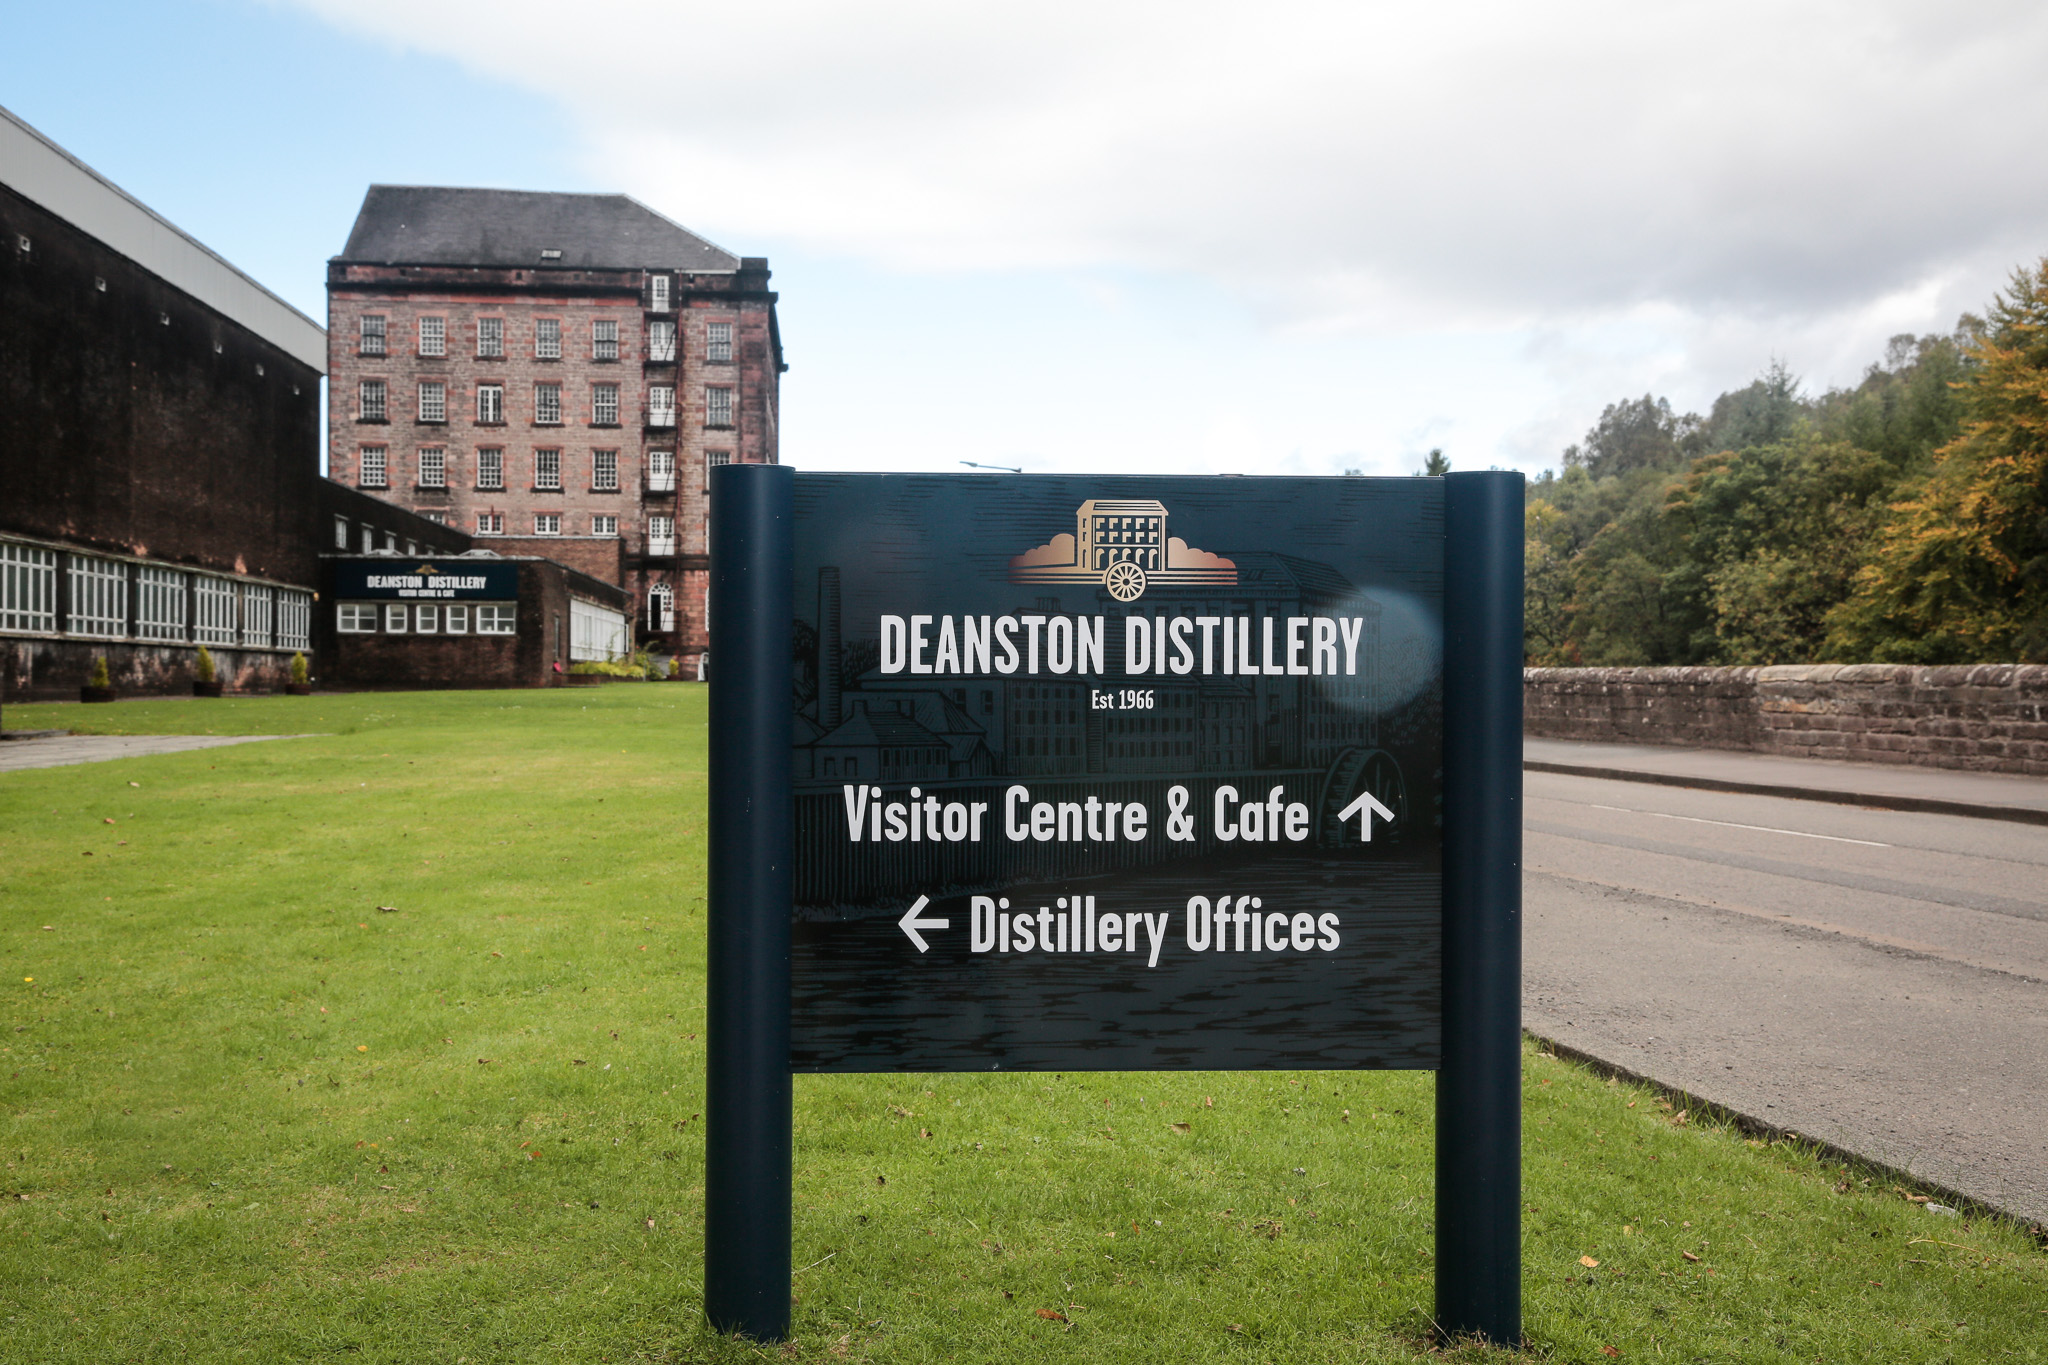 Deanston Distillery, external post and panel sign, visitor centre and offices